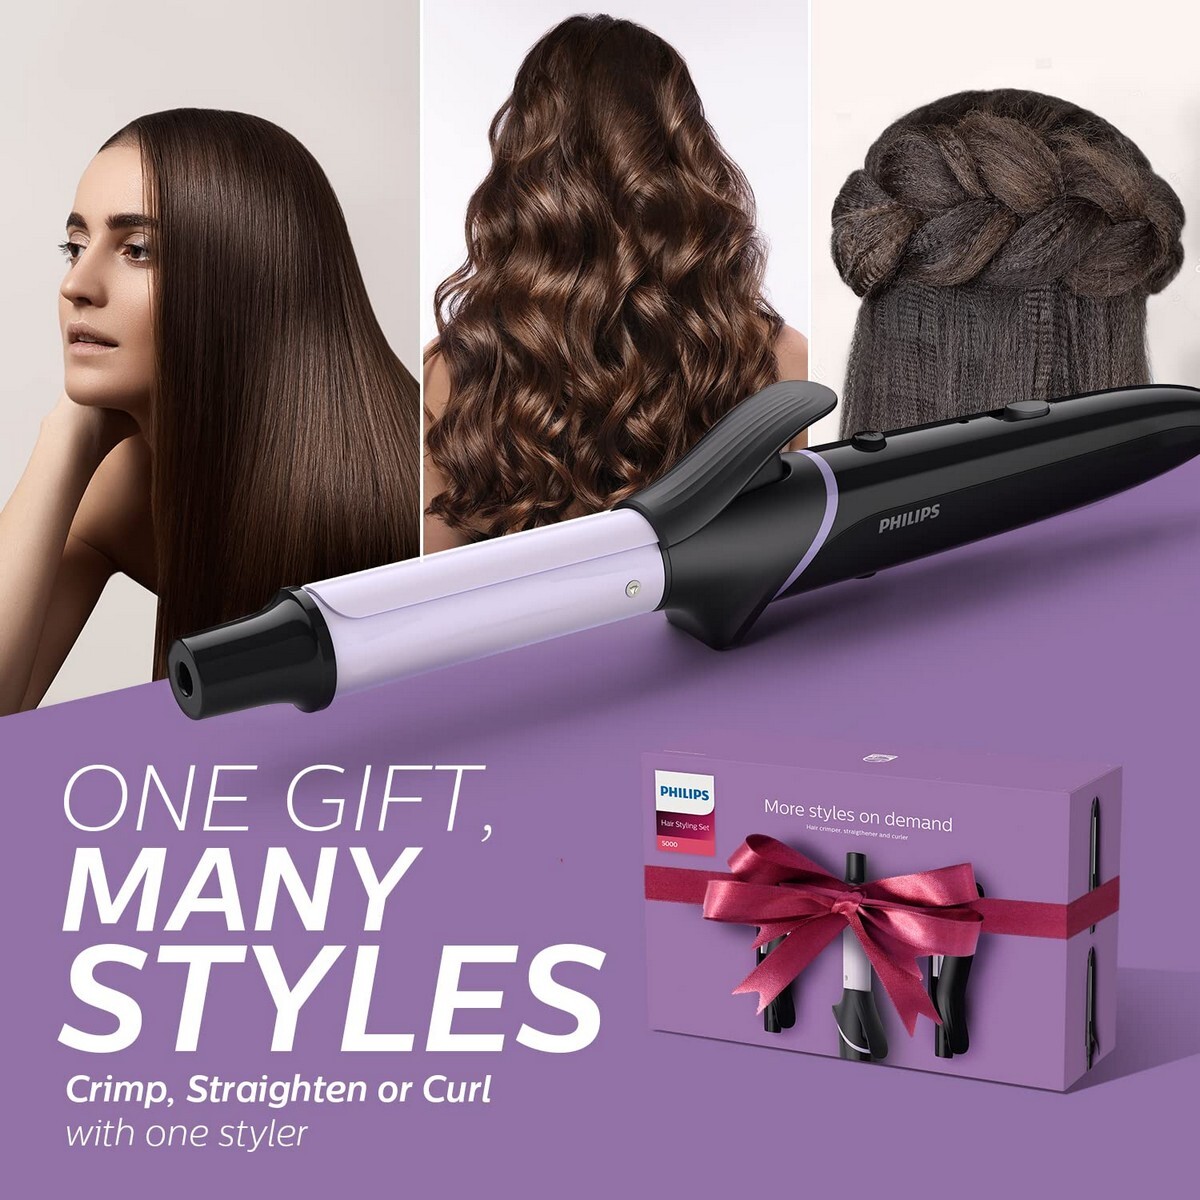 PHILIPS BHH816 Crimp, Straighten or Curl with the single tool, quickly and without fear of heat damage, Black Multi Styling Kit